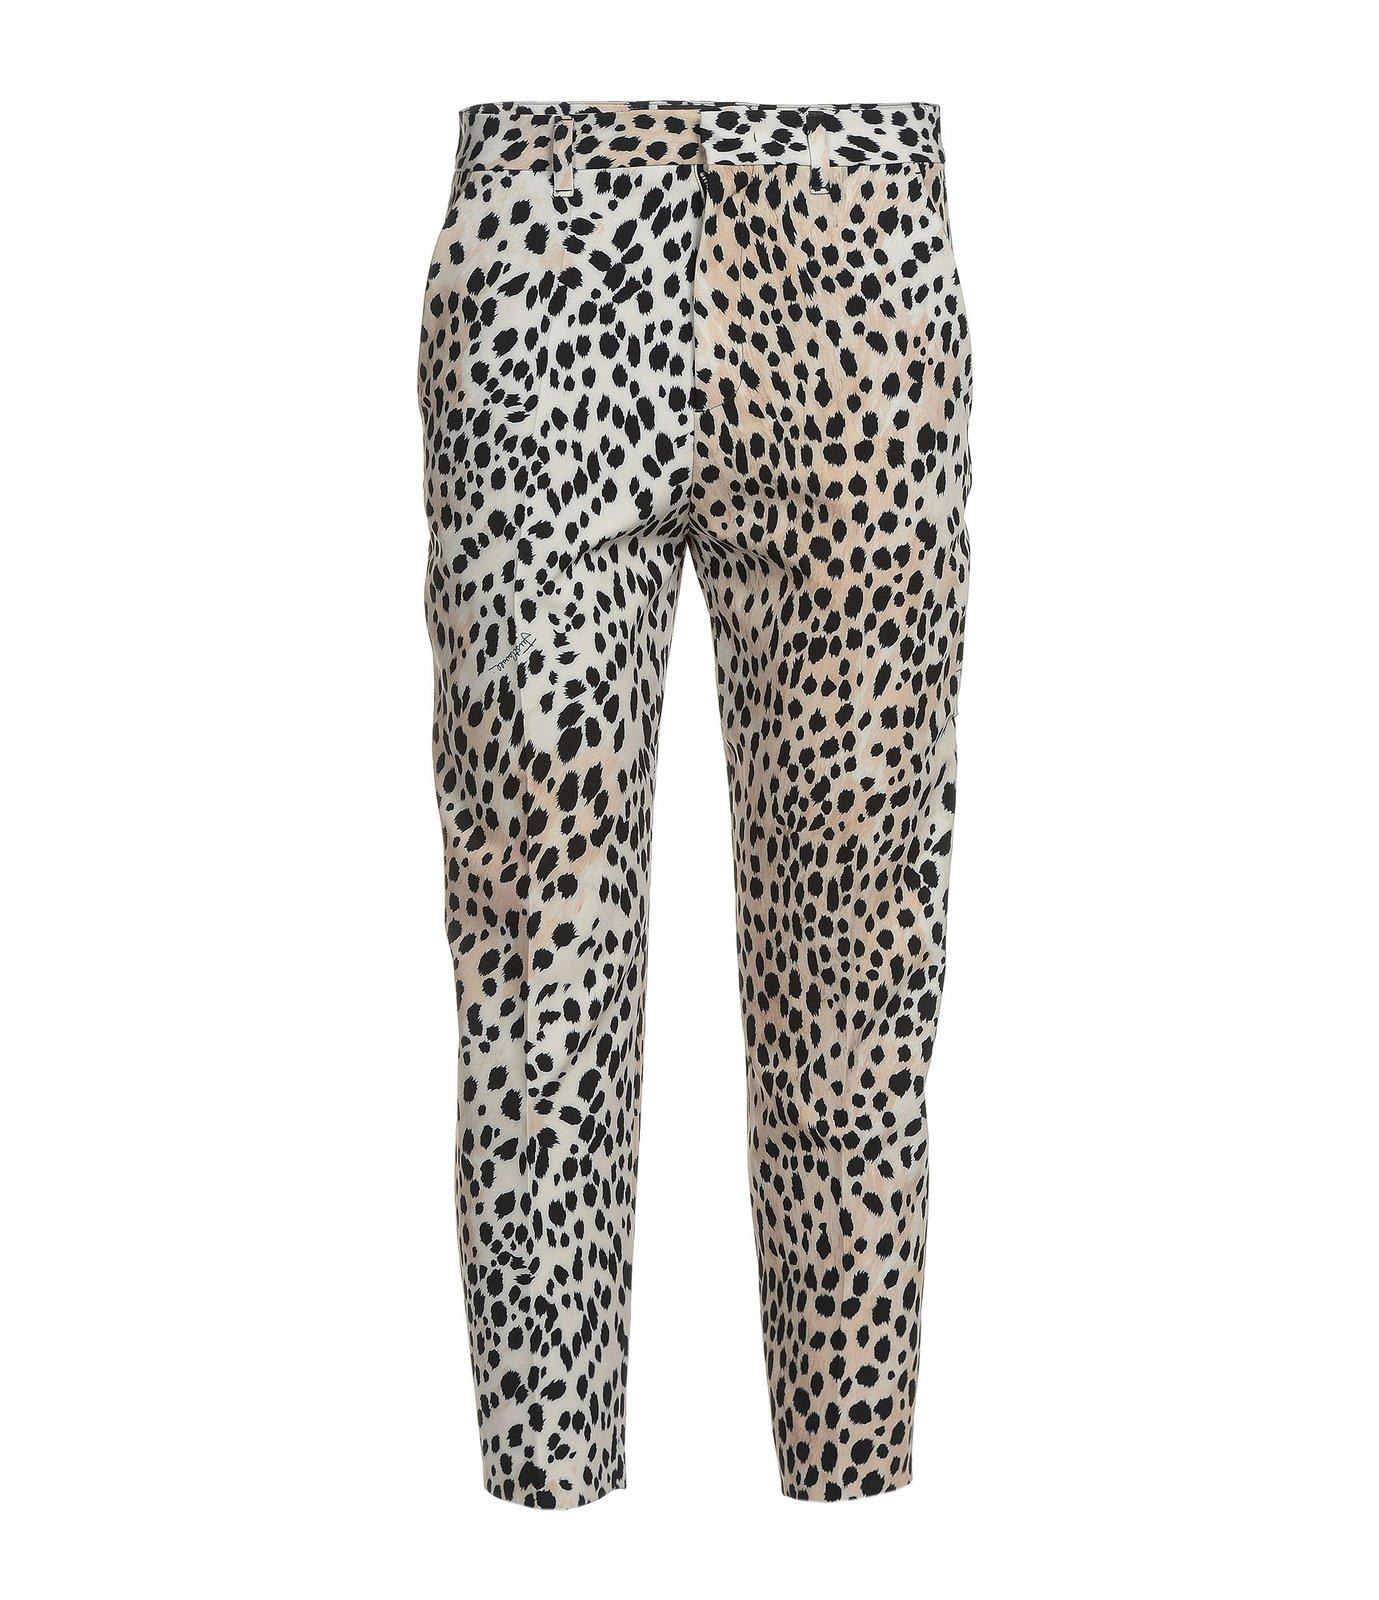 Just Cavalli Leopard Printed Cropped Pants